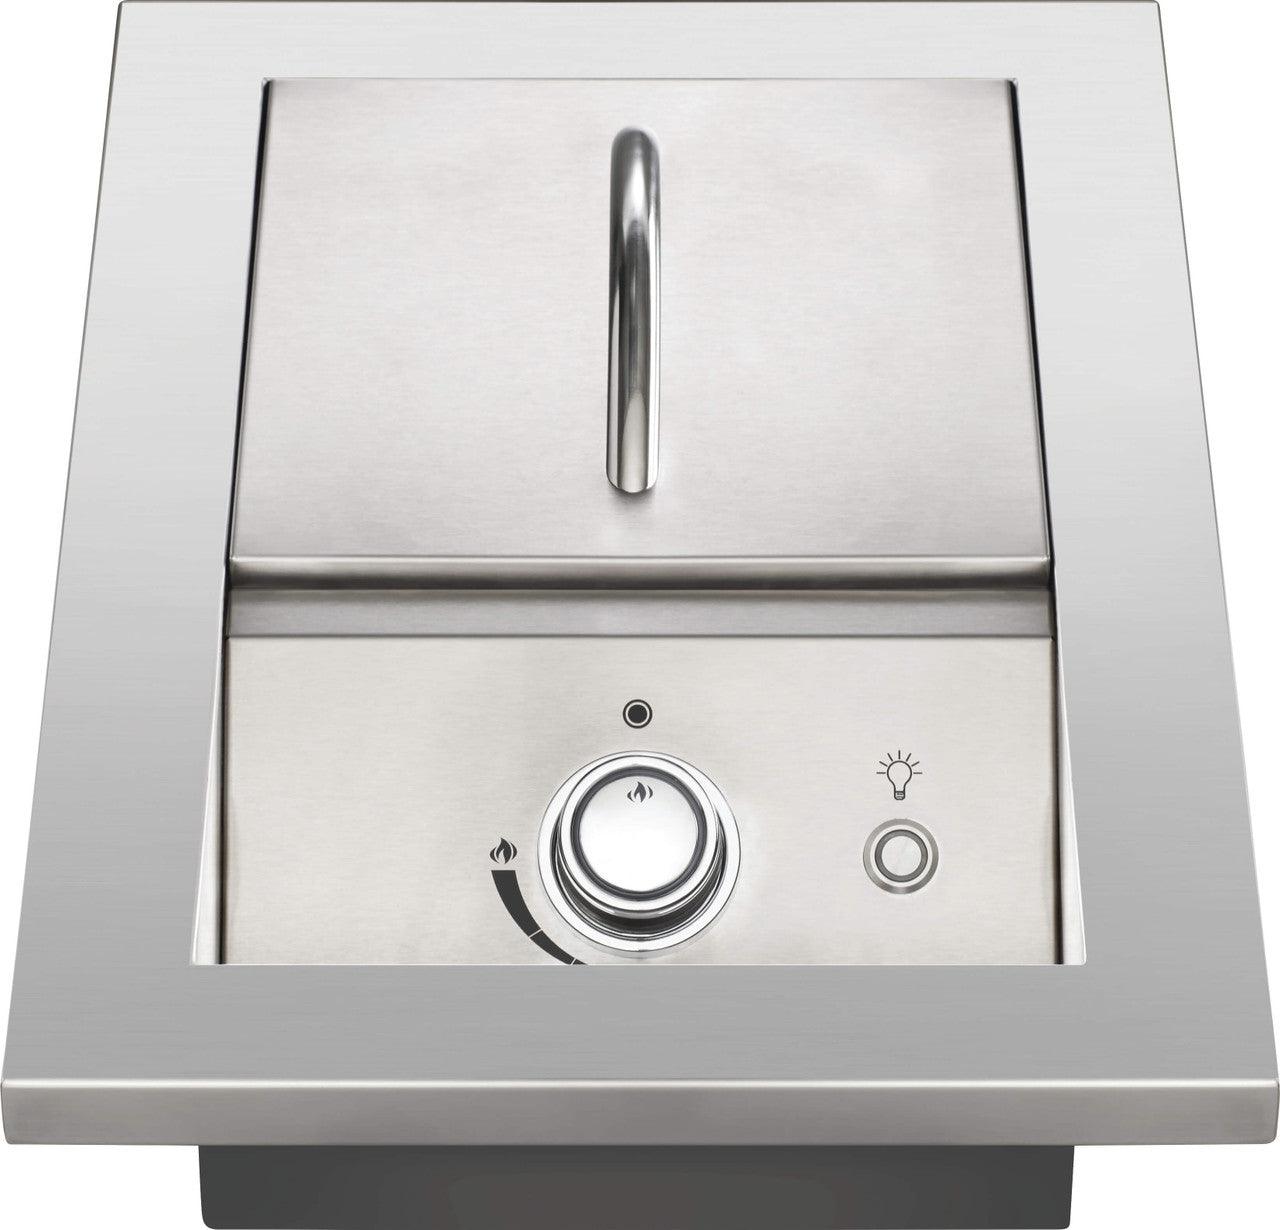 Napoleon Built in 700 Series Ring Side Burner with Stainless Steel Cover